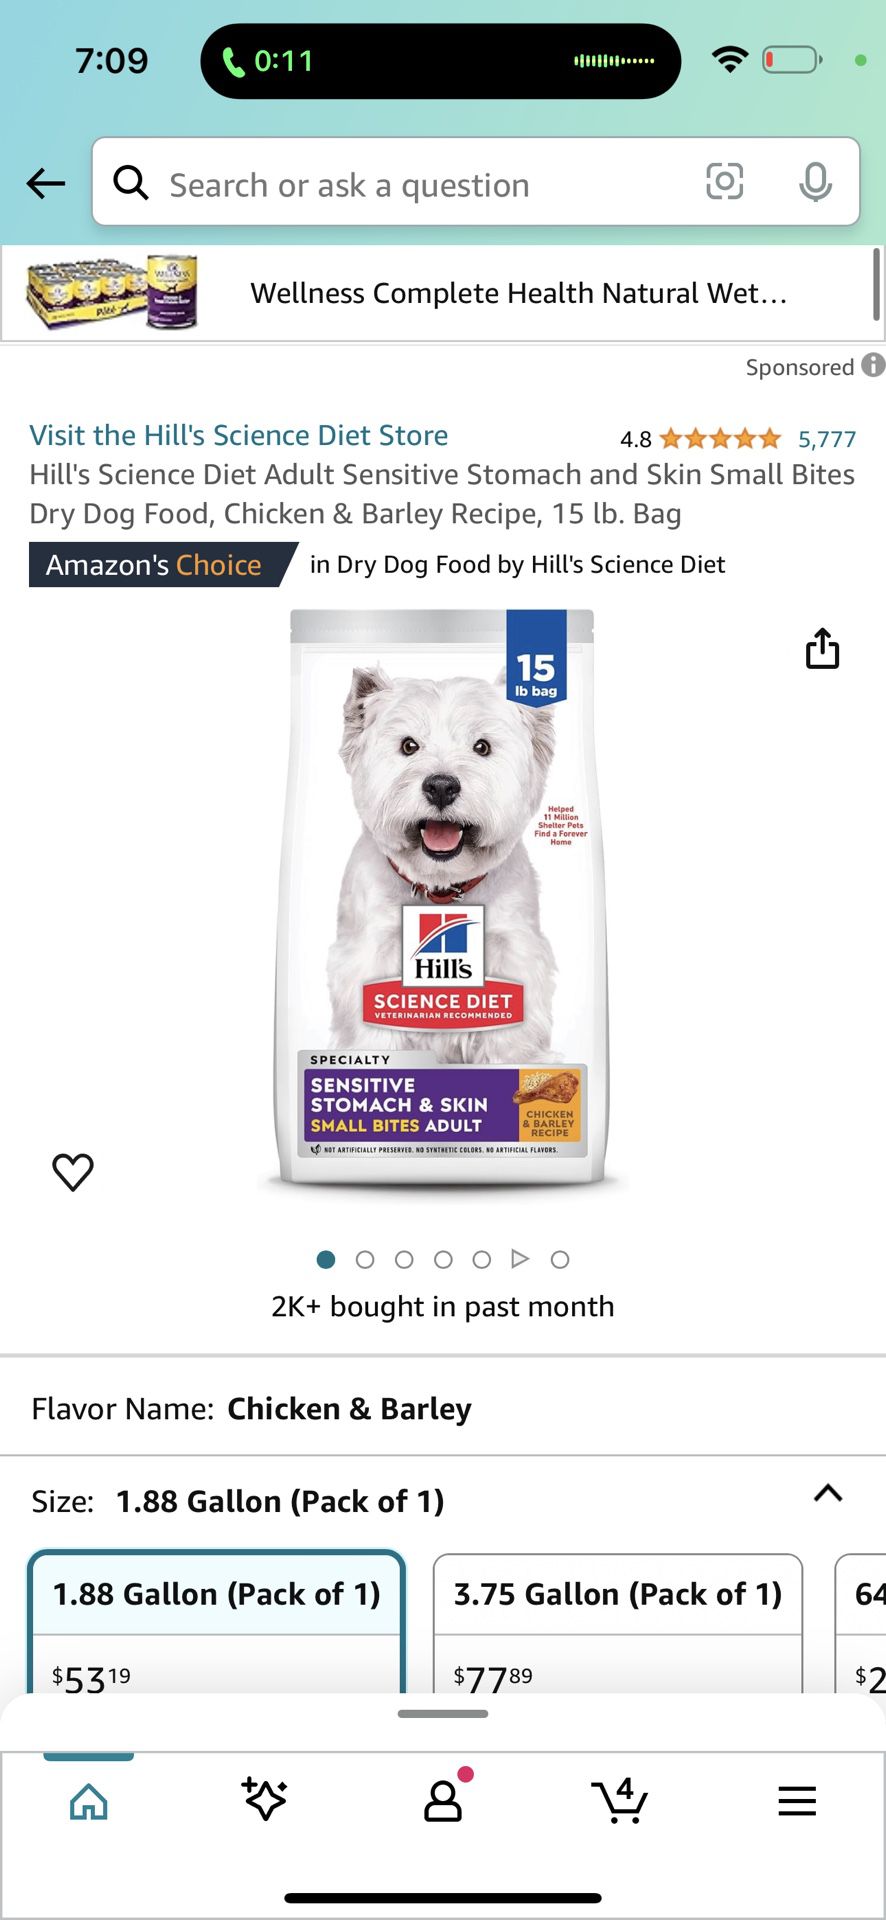 Hill's Science Diet Adult Sensitive Stomach and Skin Small Bites Dry Dog Food, Chicken & Barley Recipe, 15 lb. Bag $35